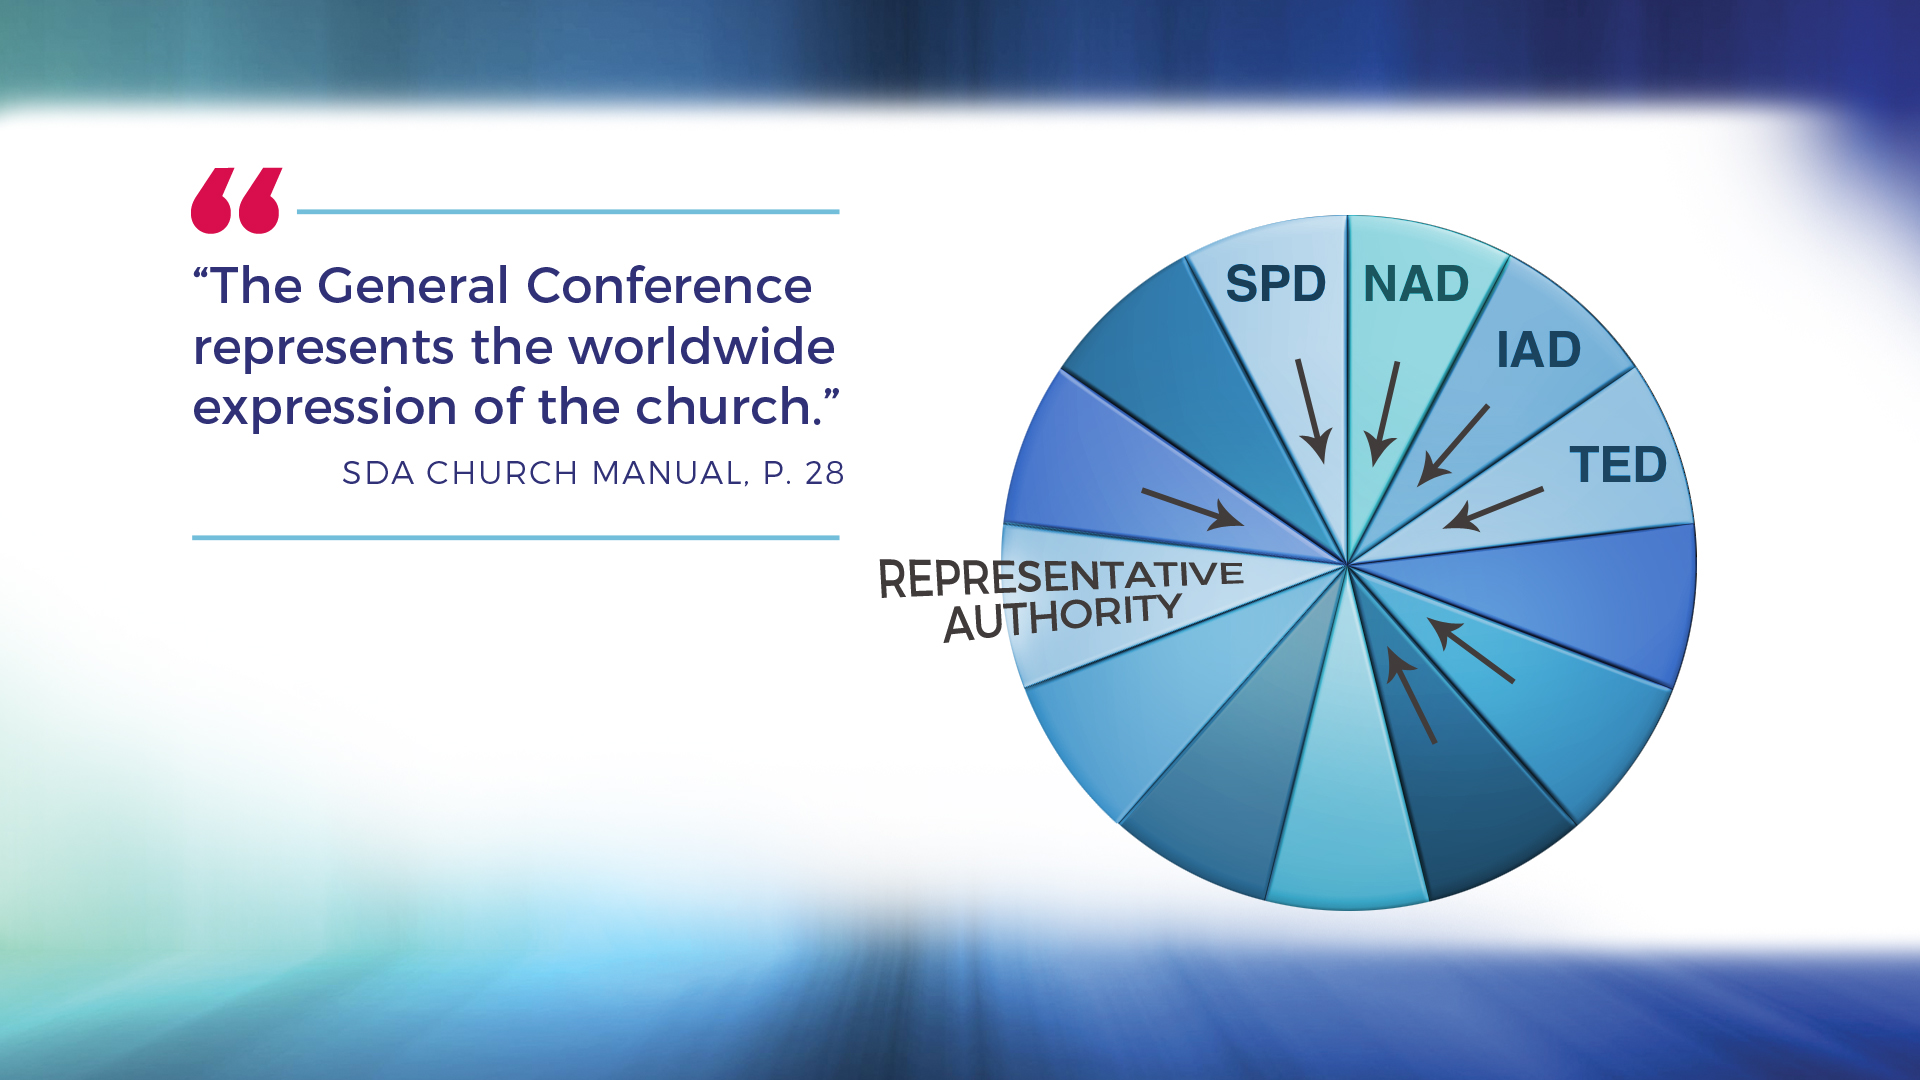 The General Conference represents the worldwide expression of the church